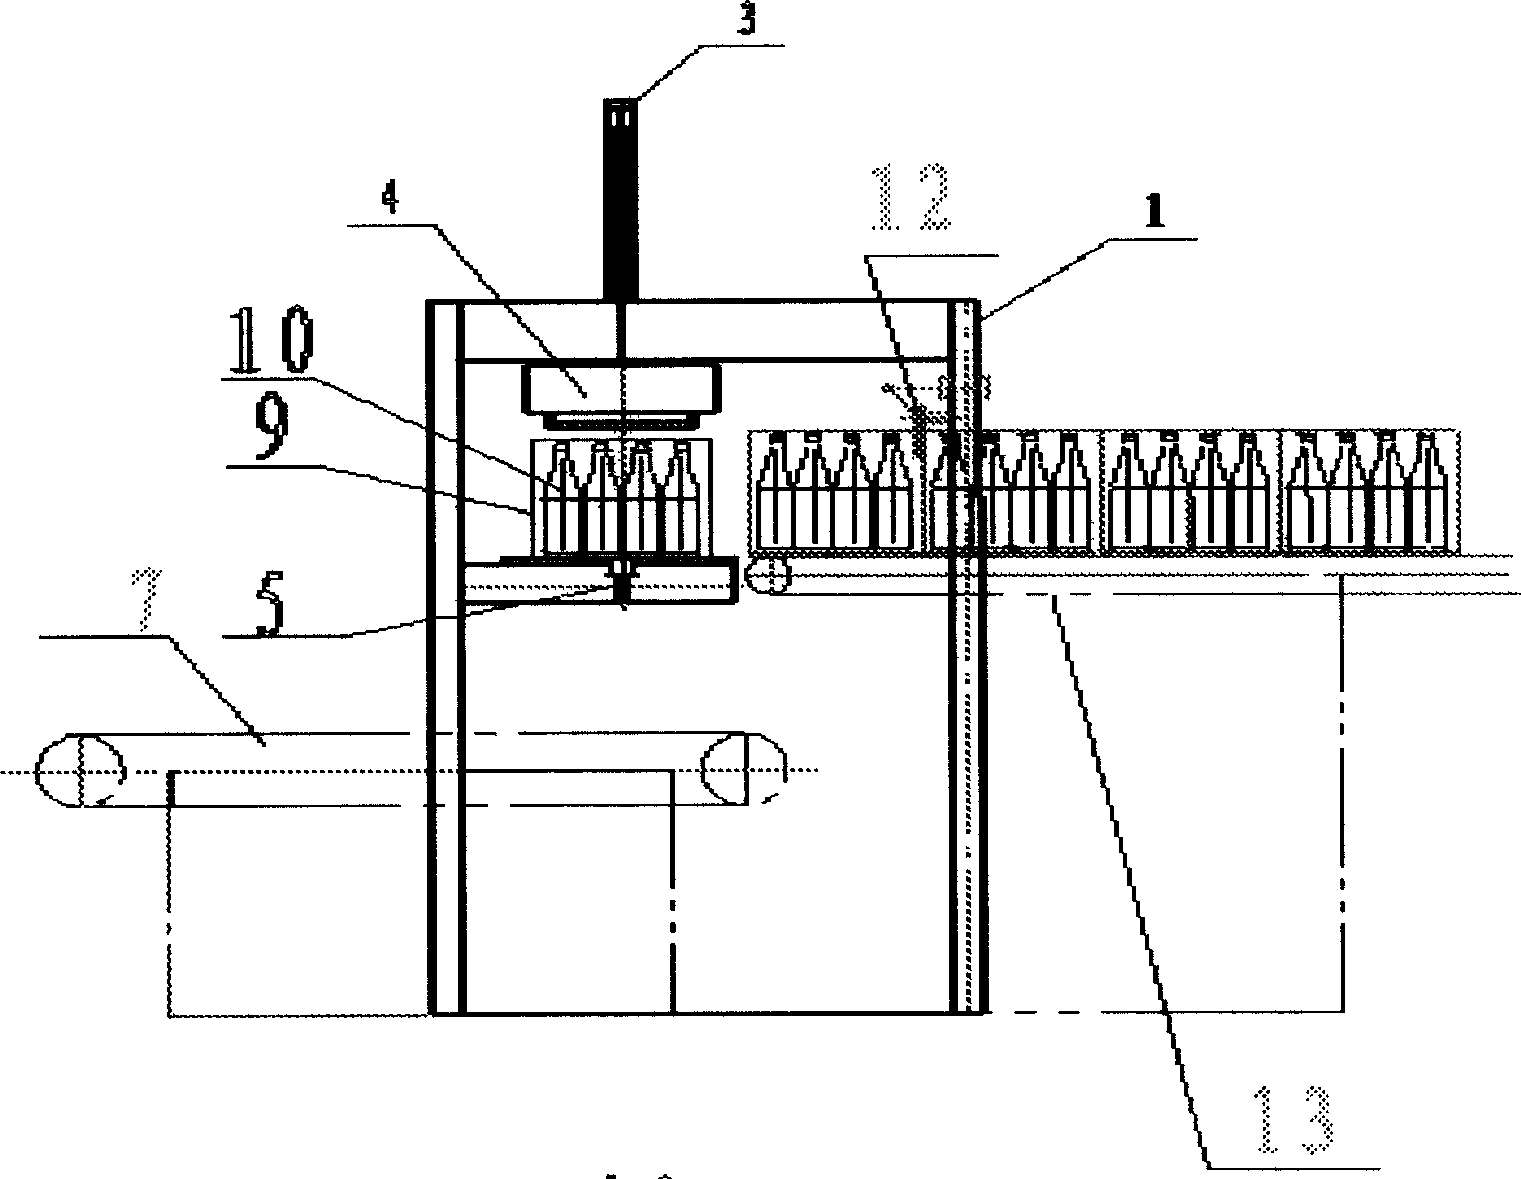 Self-operated method and system for removing group of bottle from container